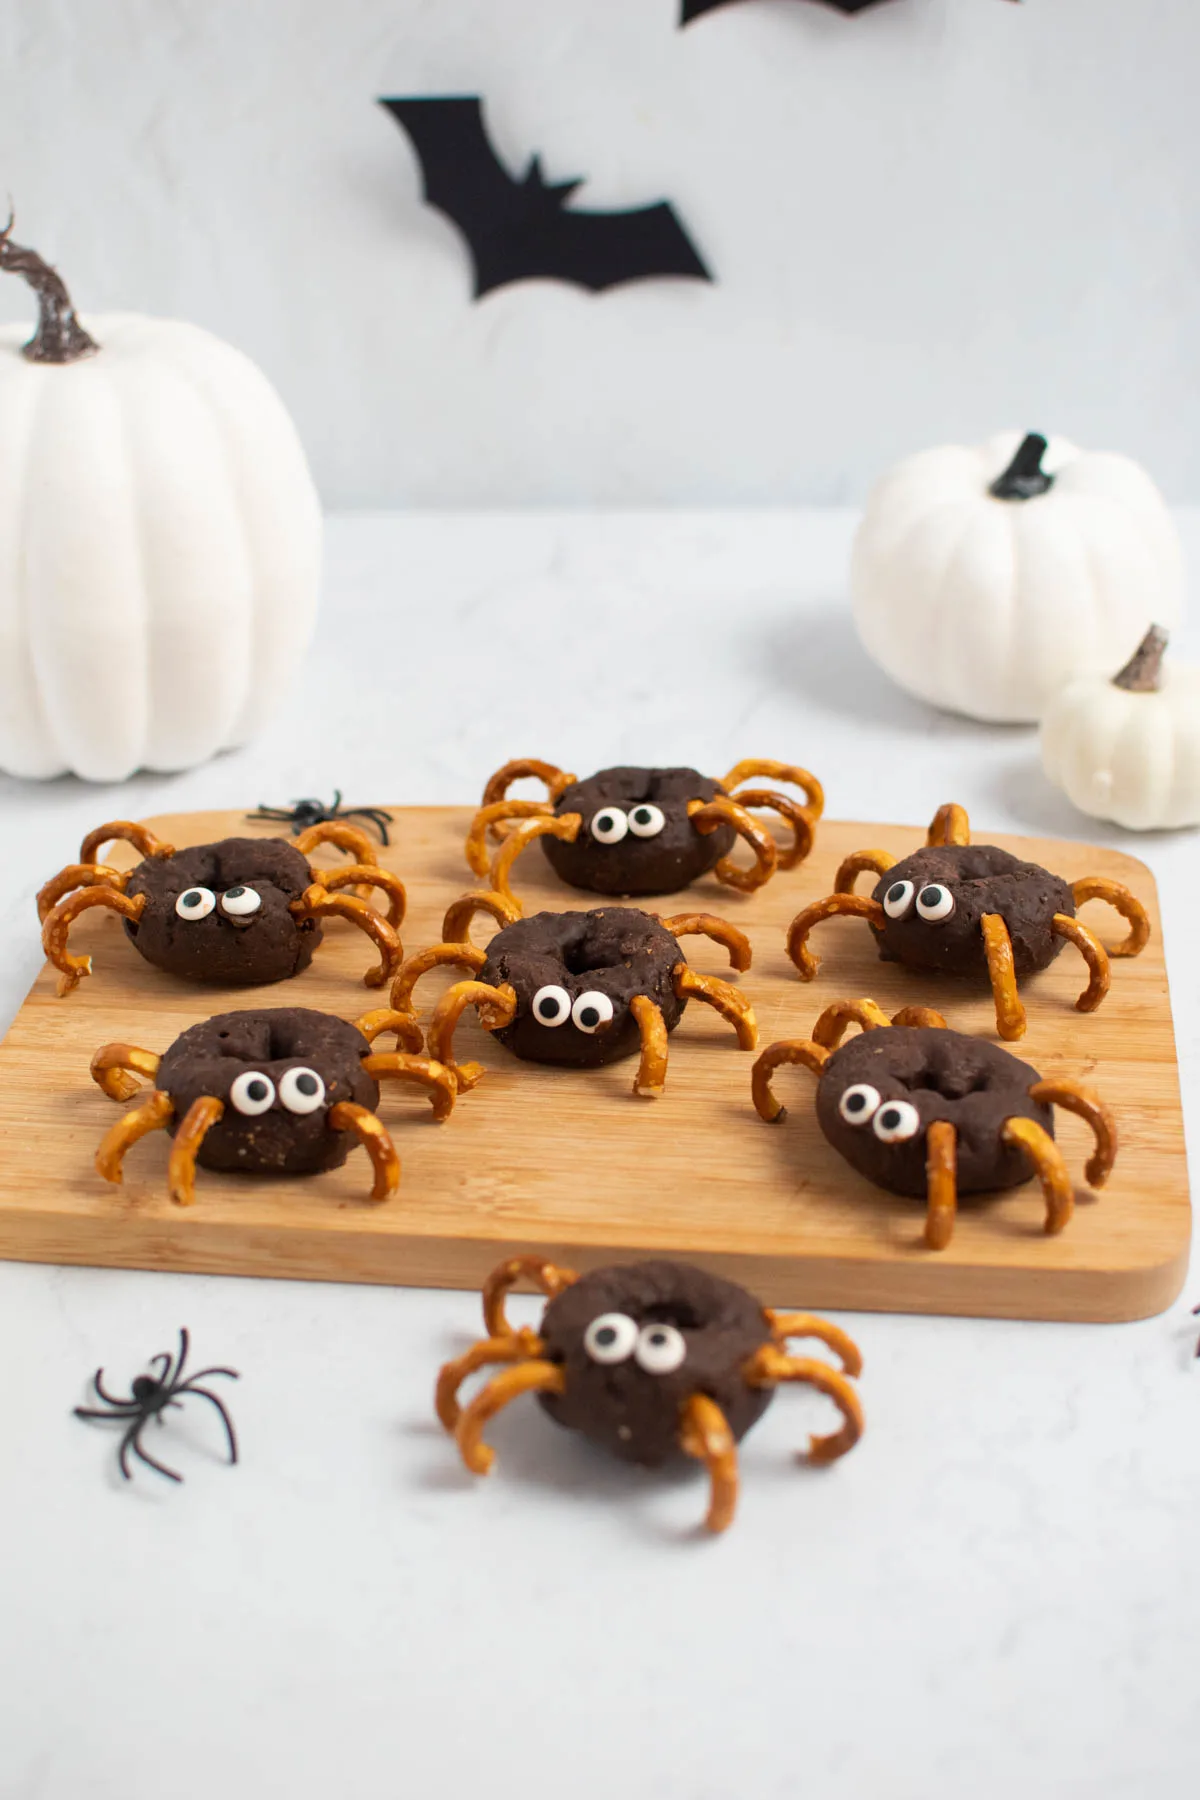 Halloween donut spiders on wood cutting board with white pumpkins and plastic spiders nearby.